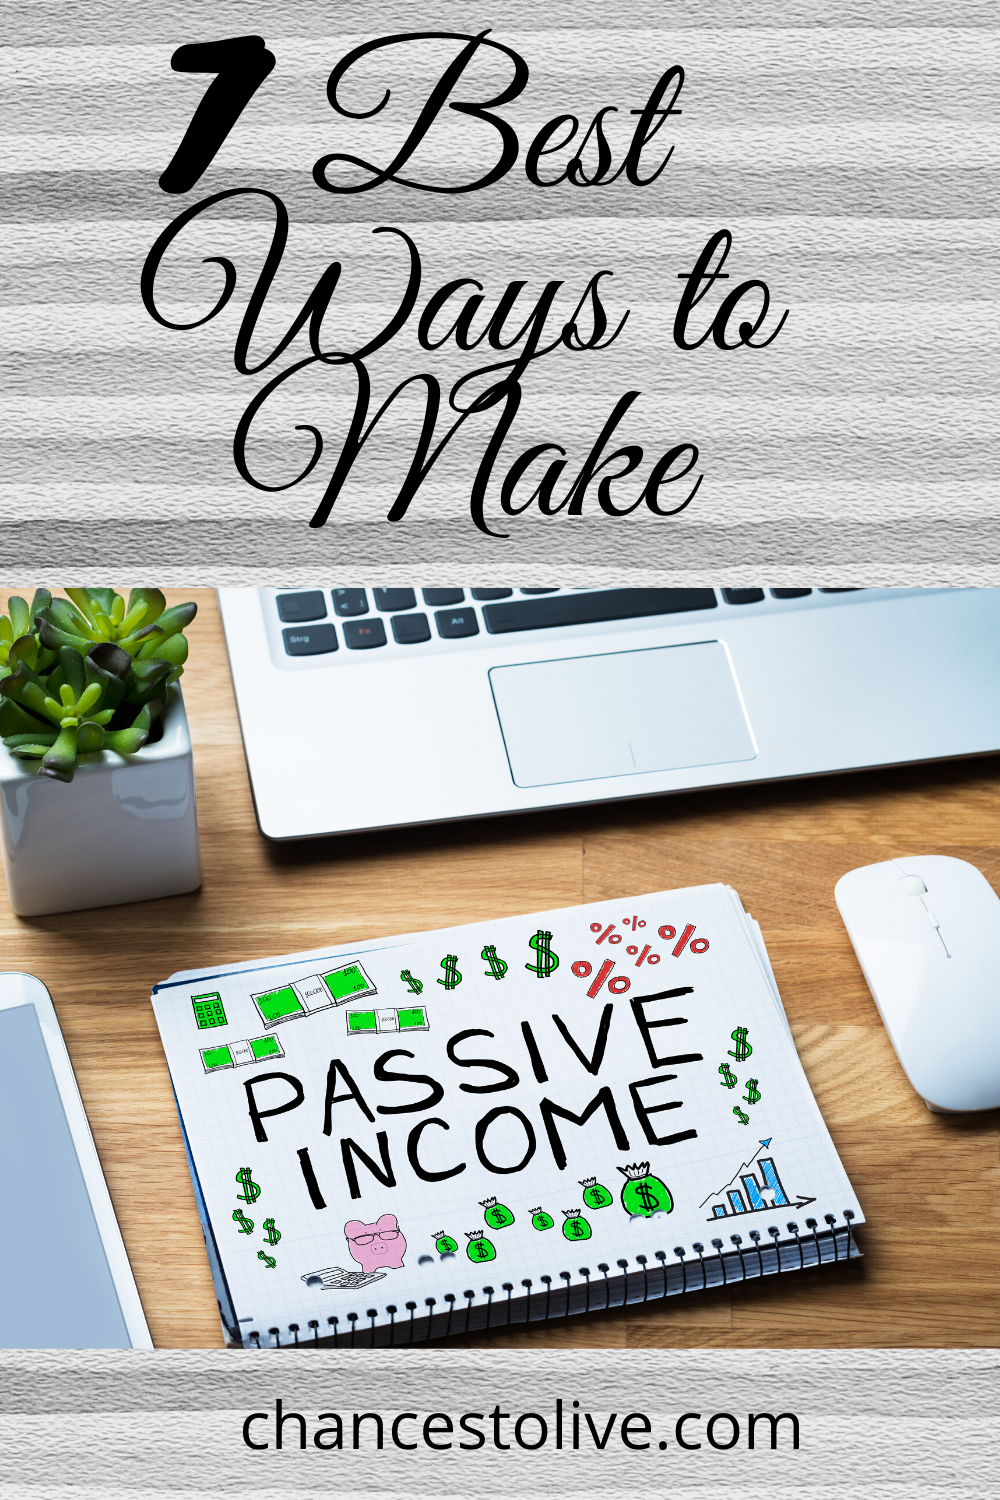 The Best Ways to Make a Passive Income